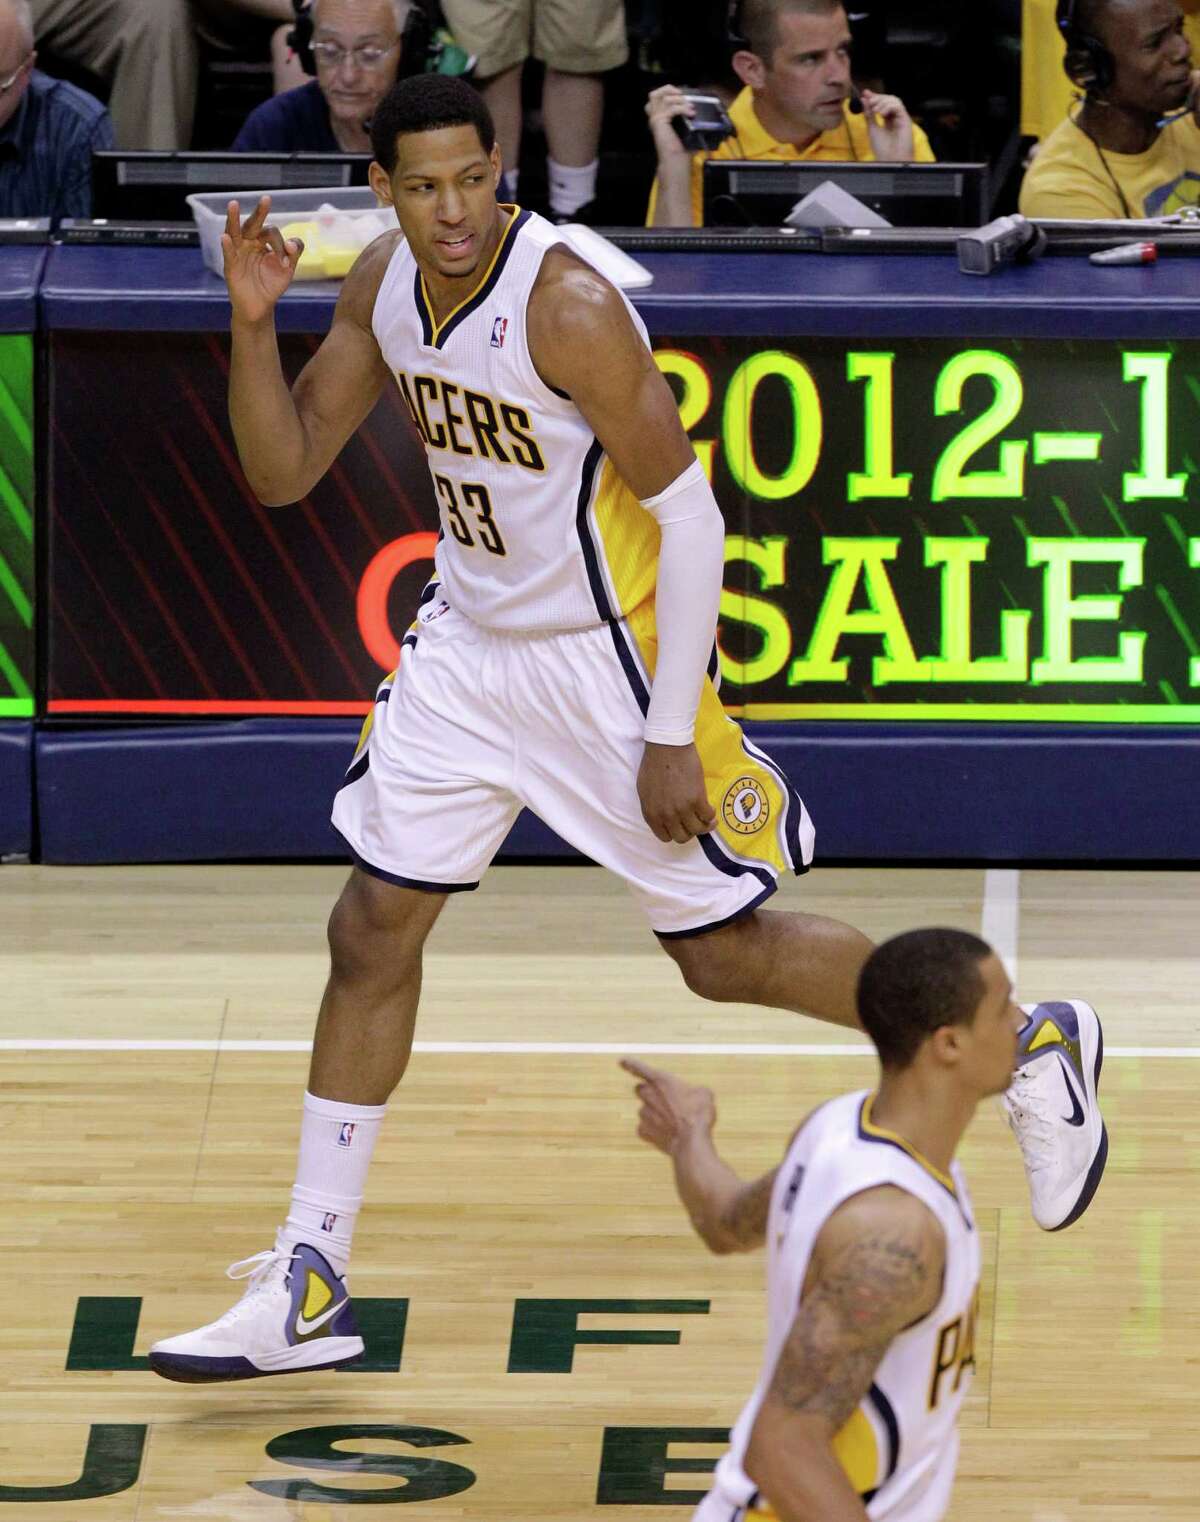 Indiana Pacers forward Danny Granger, top, signals after making a 3-pointer on an assist from shooting guard George Hill, bottom, during the second half of Game 3 against the Miami Heat in their NBA basketball Eastern Conference semifinal playoff series in Indianapolis, Thursday, May 17, 2012. (AP Photo/Michael Conroy)